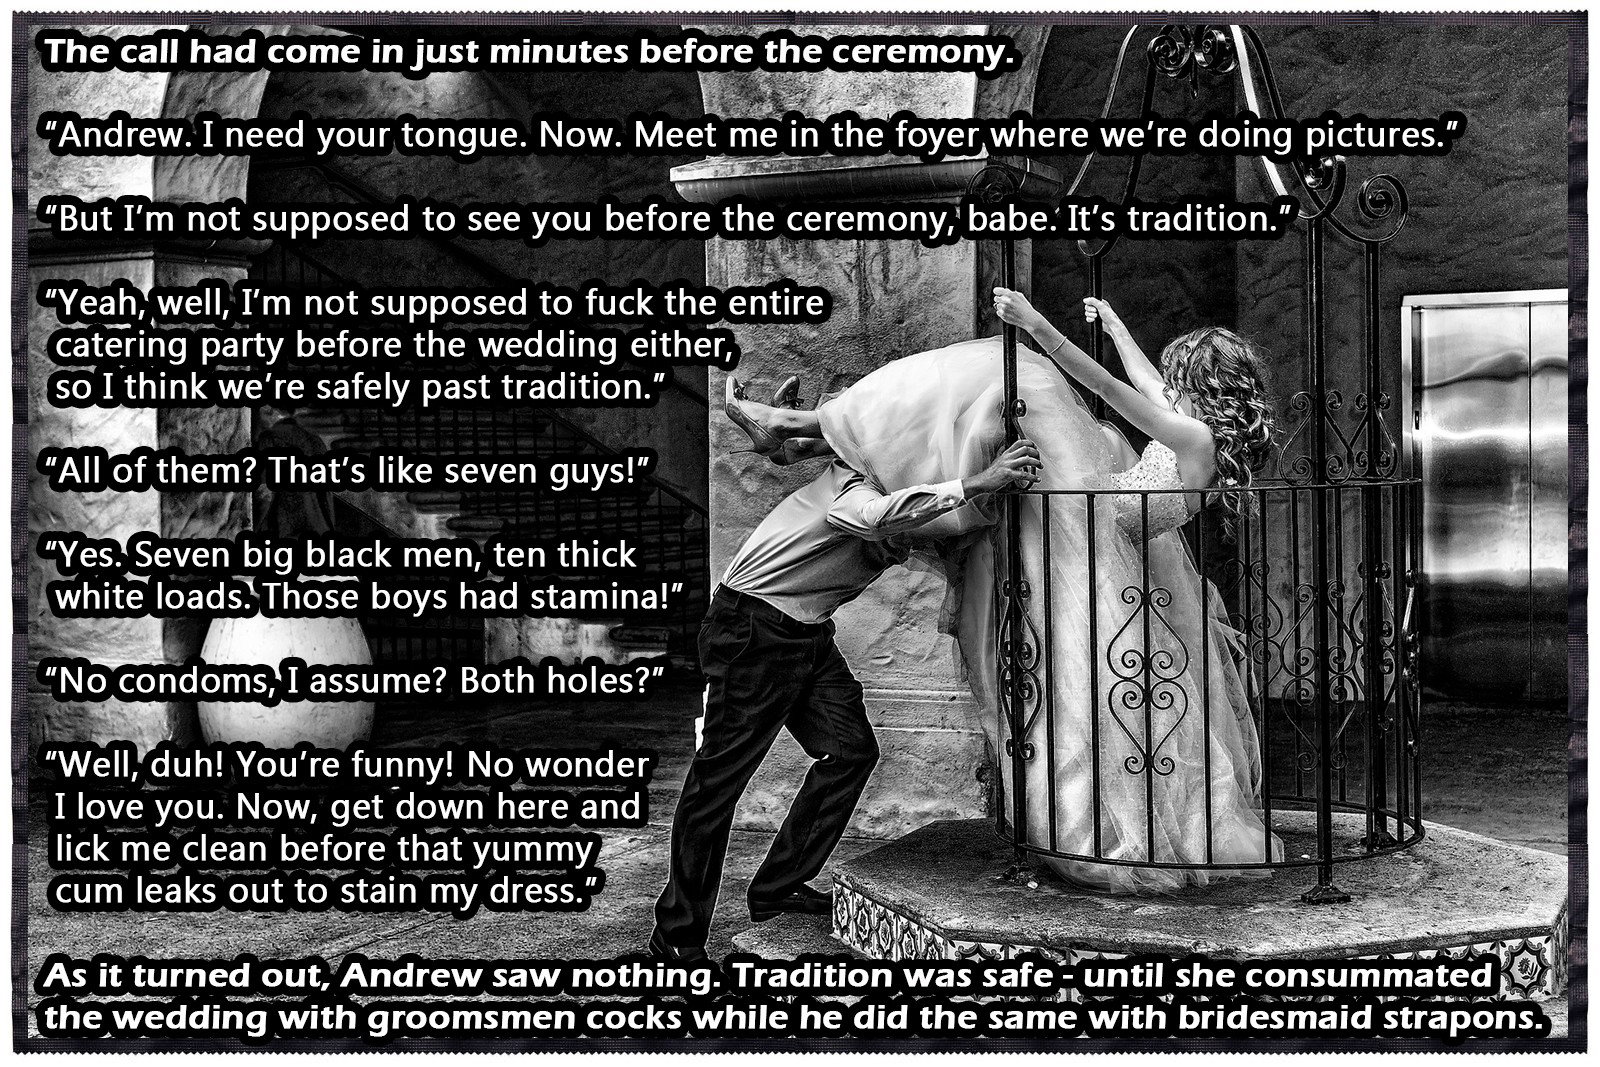 Photo by Bob Neils with the username @cockobsessedauthor,  June 2, 2019 at 2:03 PM. The post is about the topic Cuckold Captions and the text says 'Cuckold Caption: Wedding Tradition'